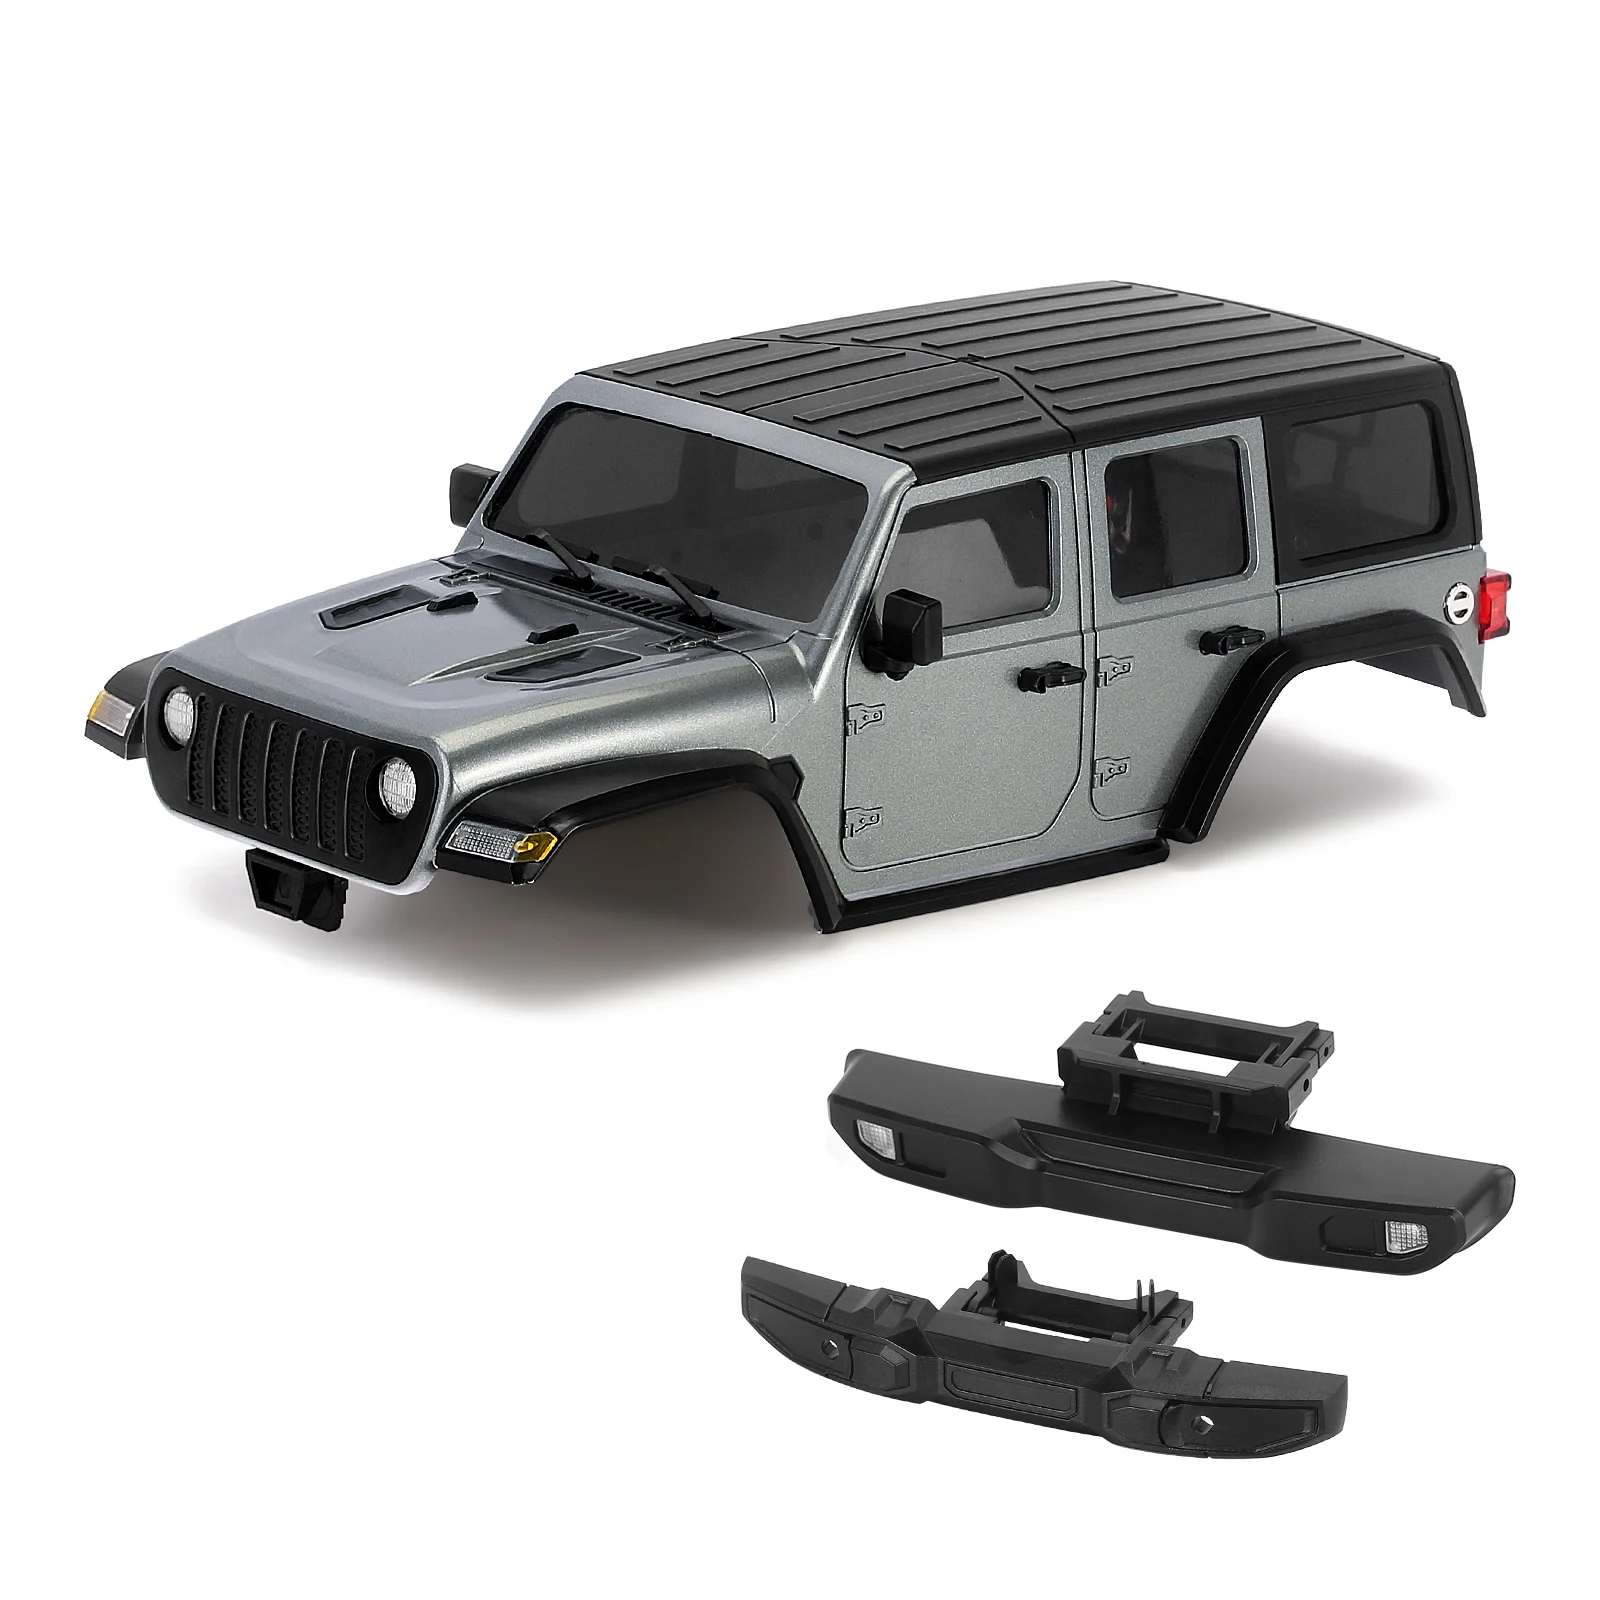 

ABS 6.10in Wheelbase Hardtop Body Kit with Front Rear Bumpers for 1/18 RC Crawler TRX4M Bronco Defender Chassis (4M-66)